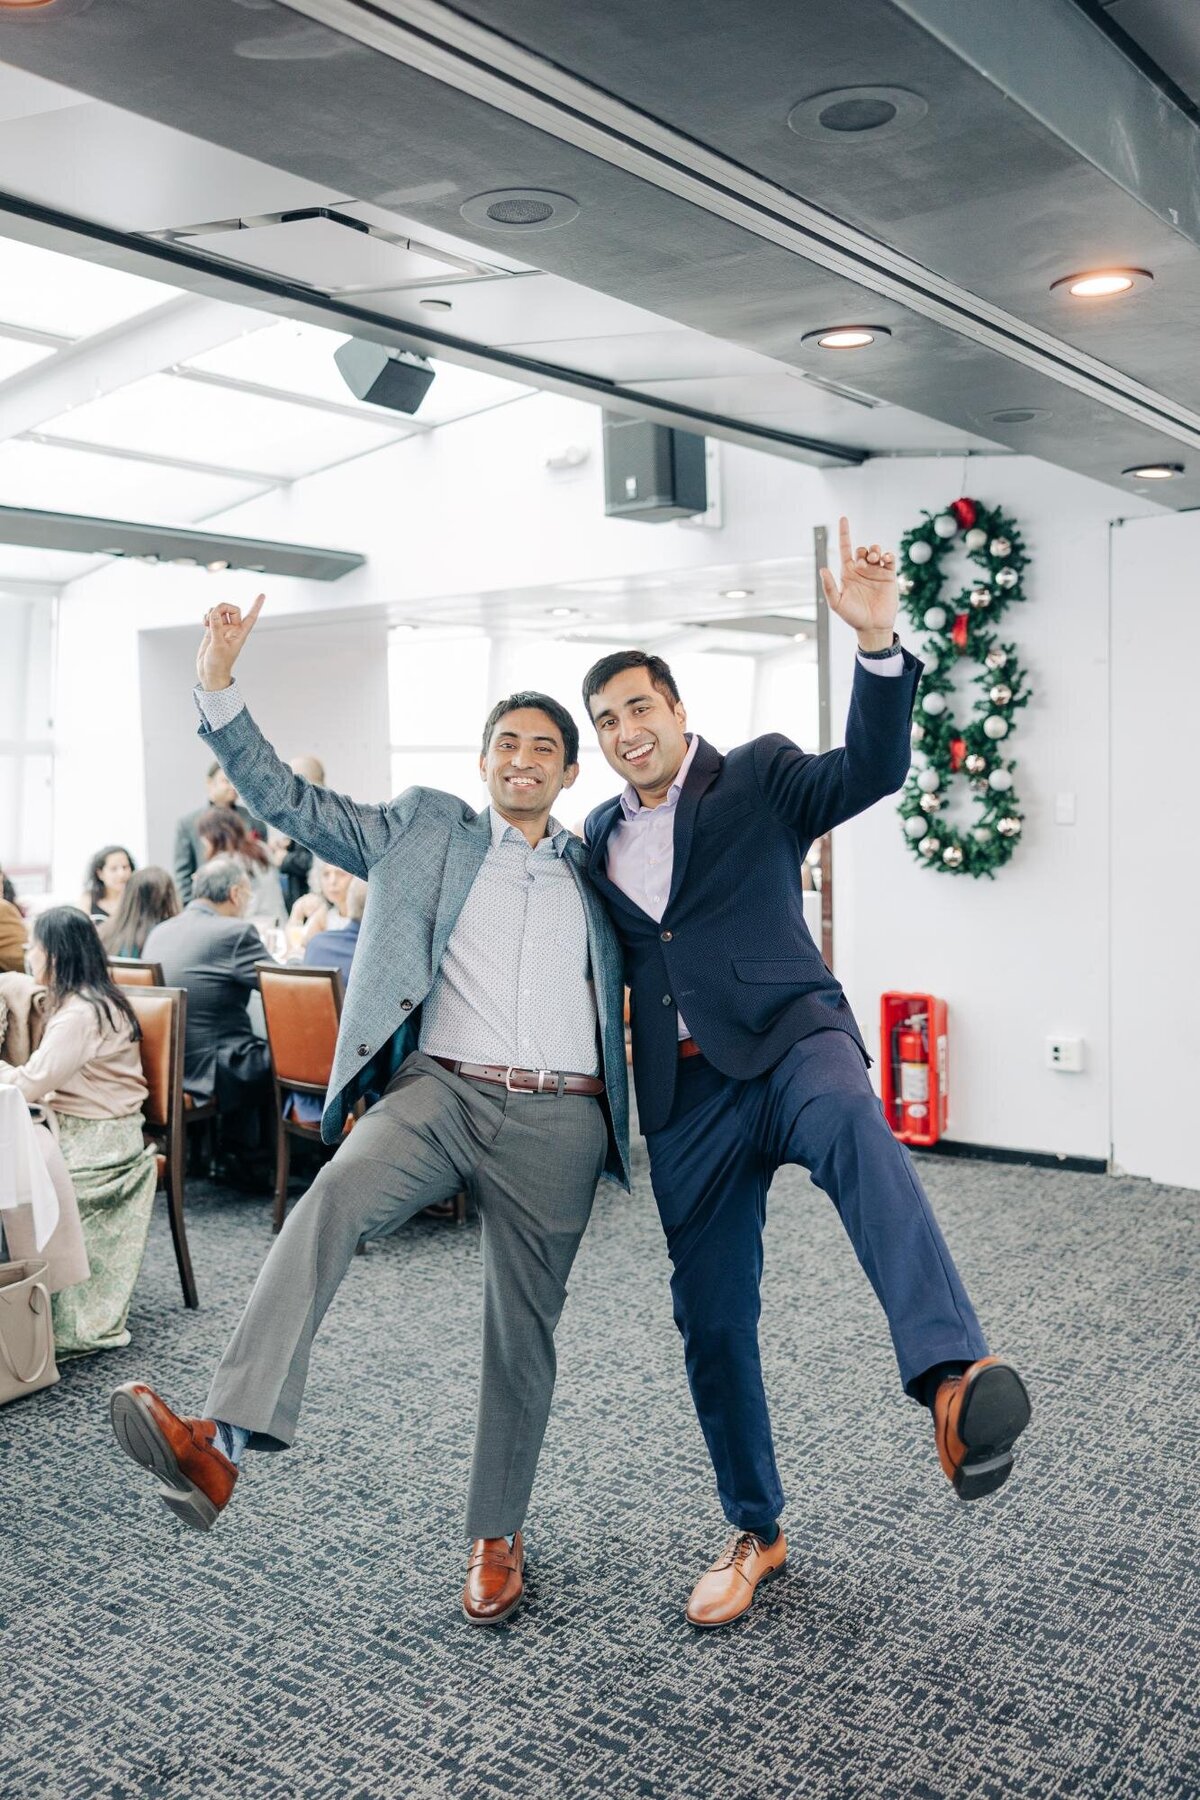 Two men in suits joyfully posing with one leg raised in a festive room with people dining in the background.